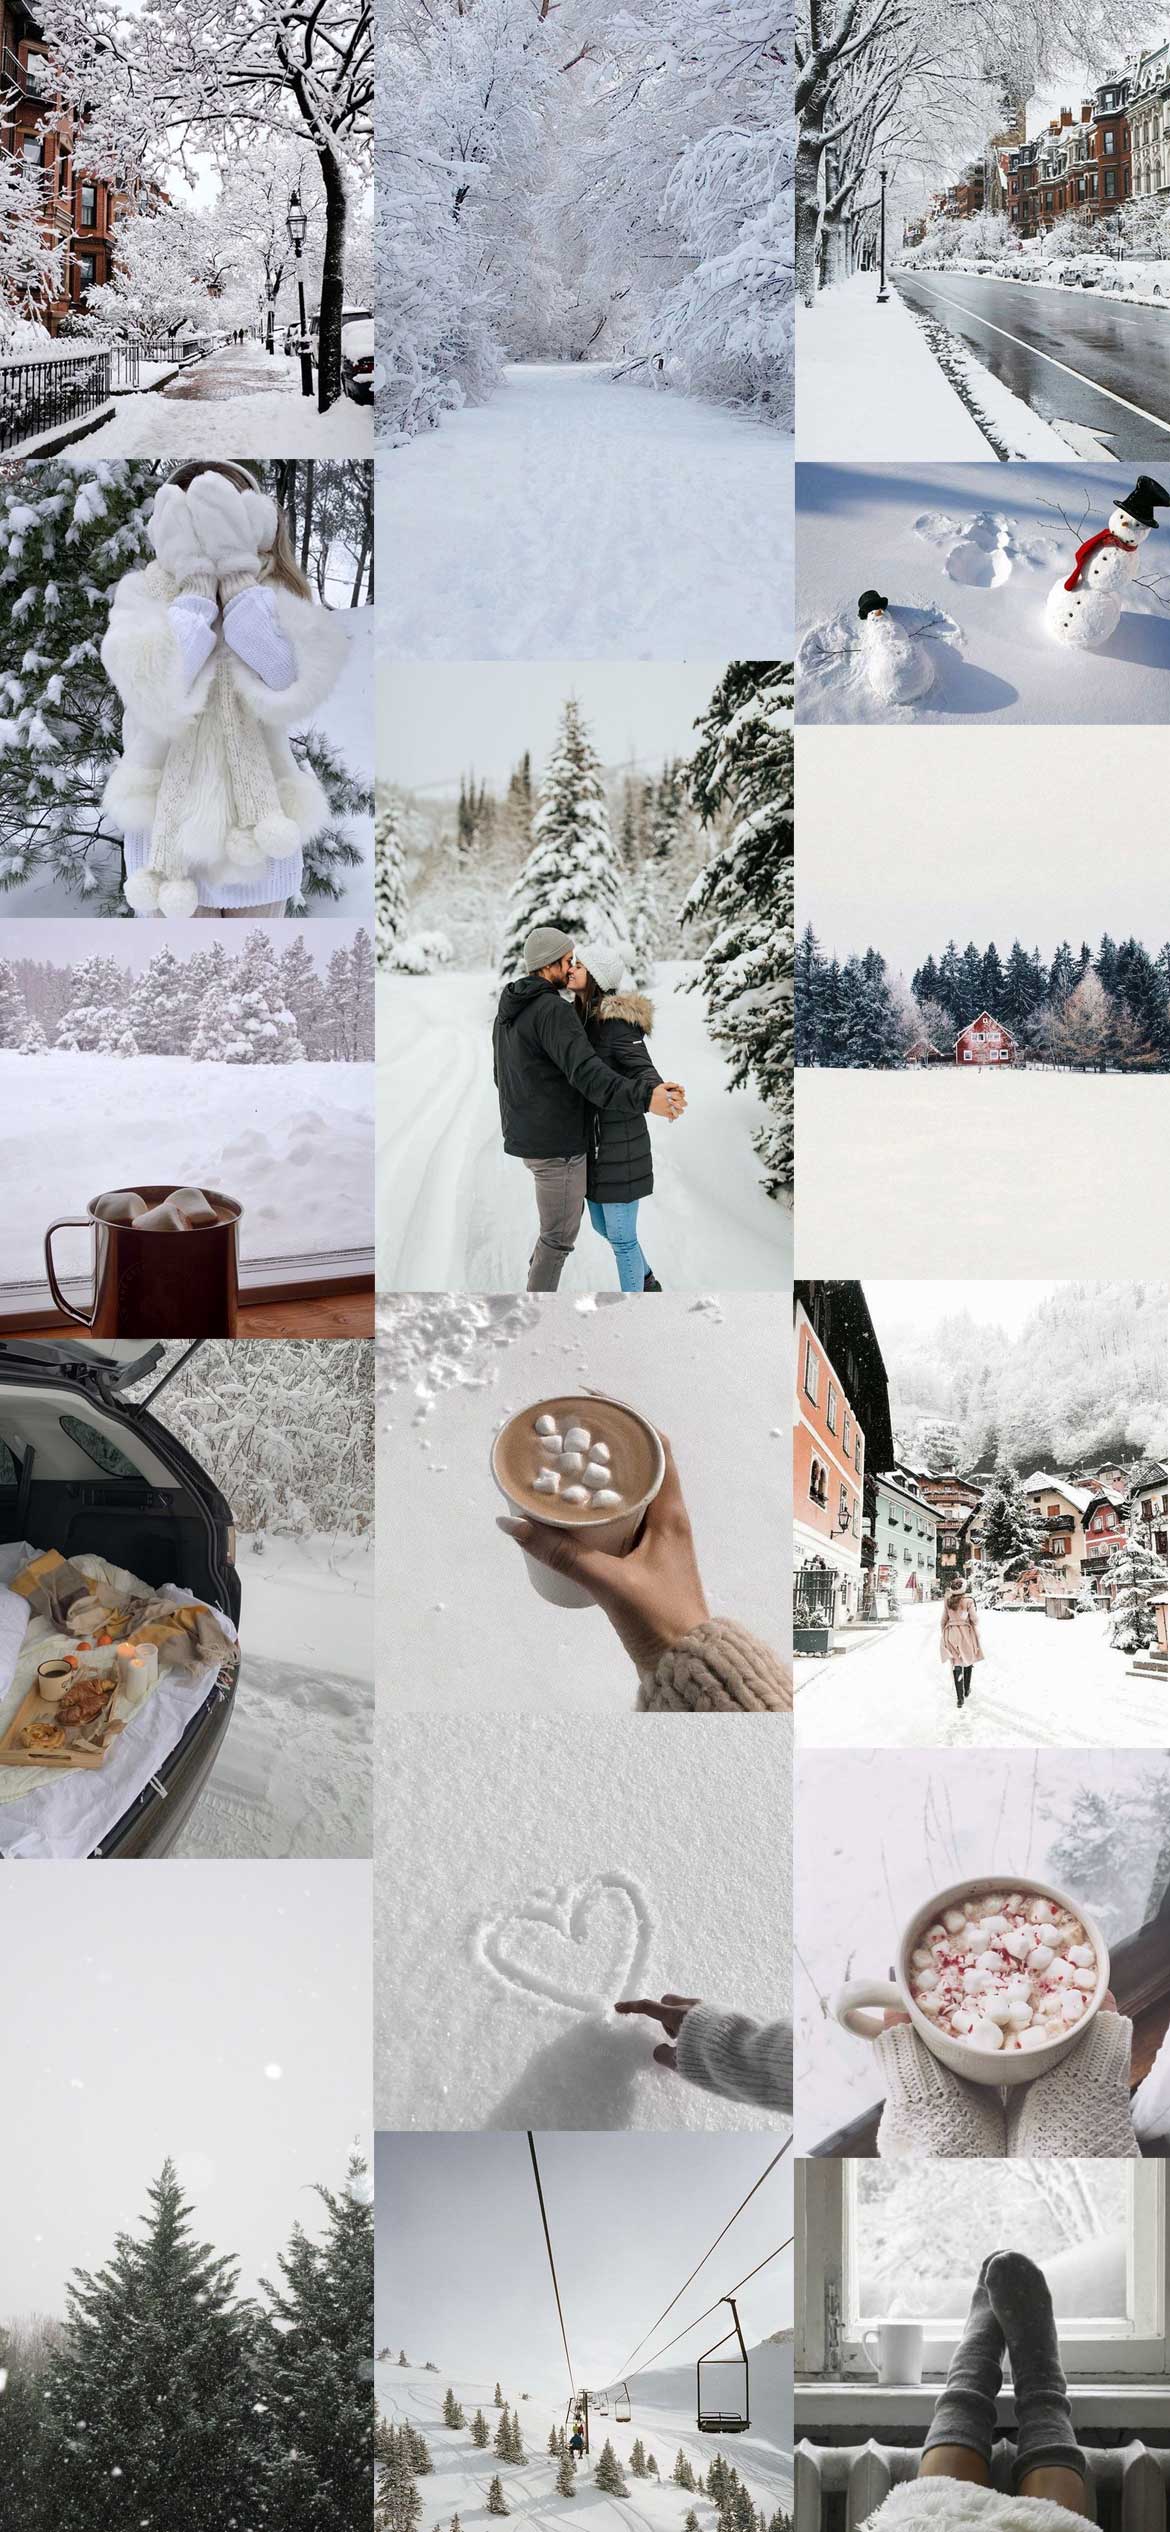 White Winter Collage Wallpaper Ideas, Winter Collage Aesthetic Wallpaper